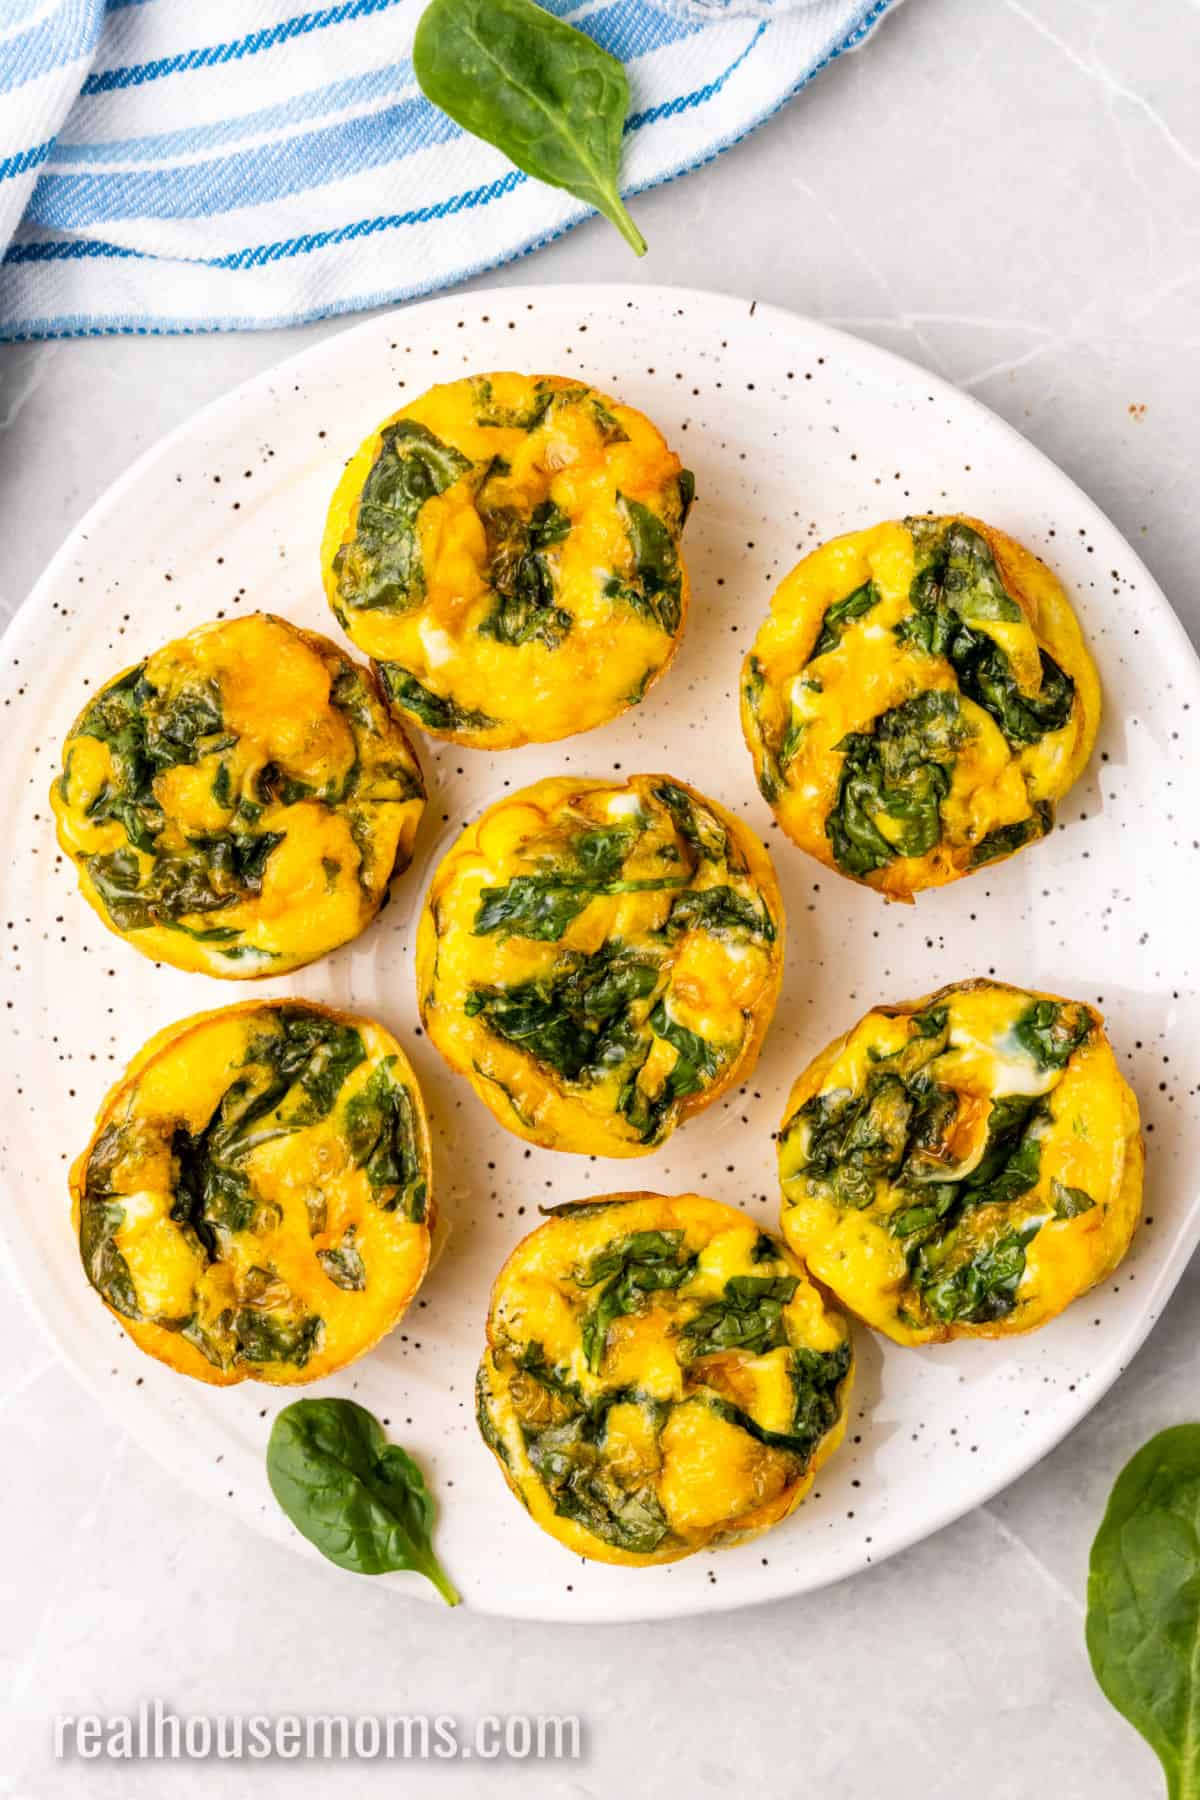 https://realhousemoms.com/wp-content/uploads/Spinach-and-Cheese-Breakfast-Egg-Bites-IC-4.jpg